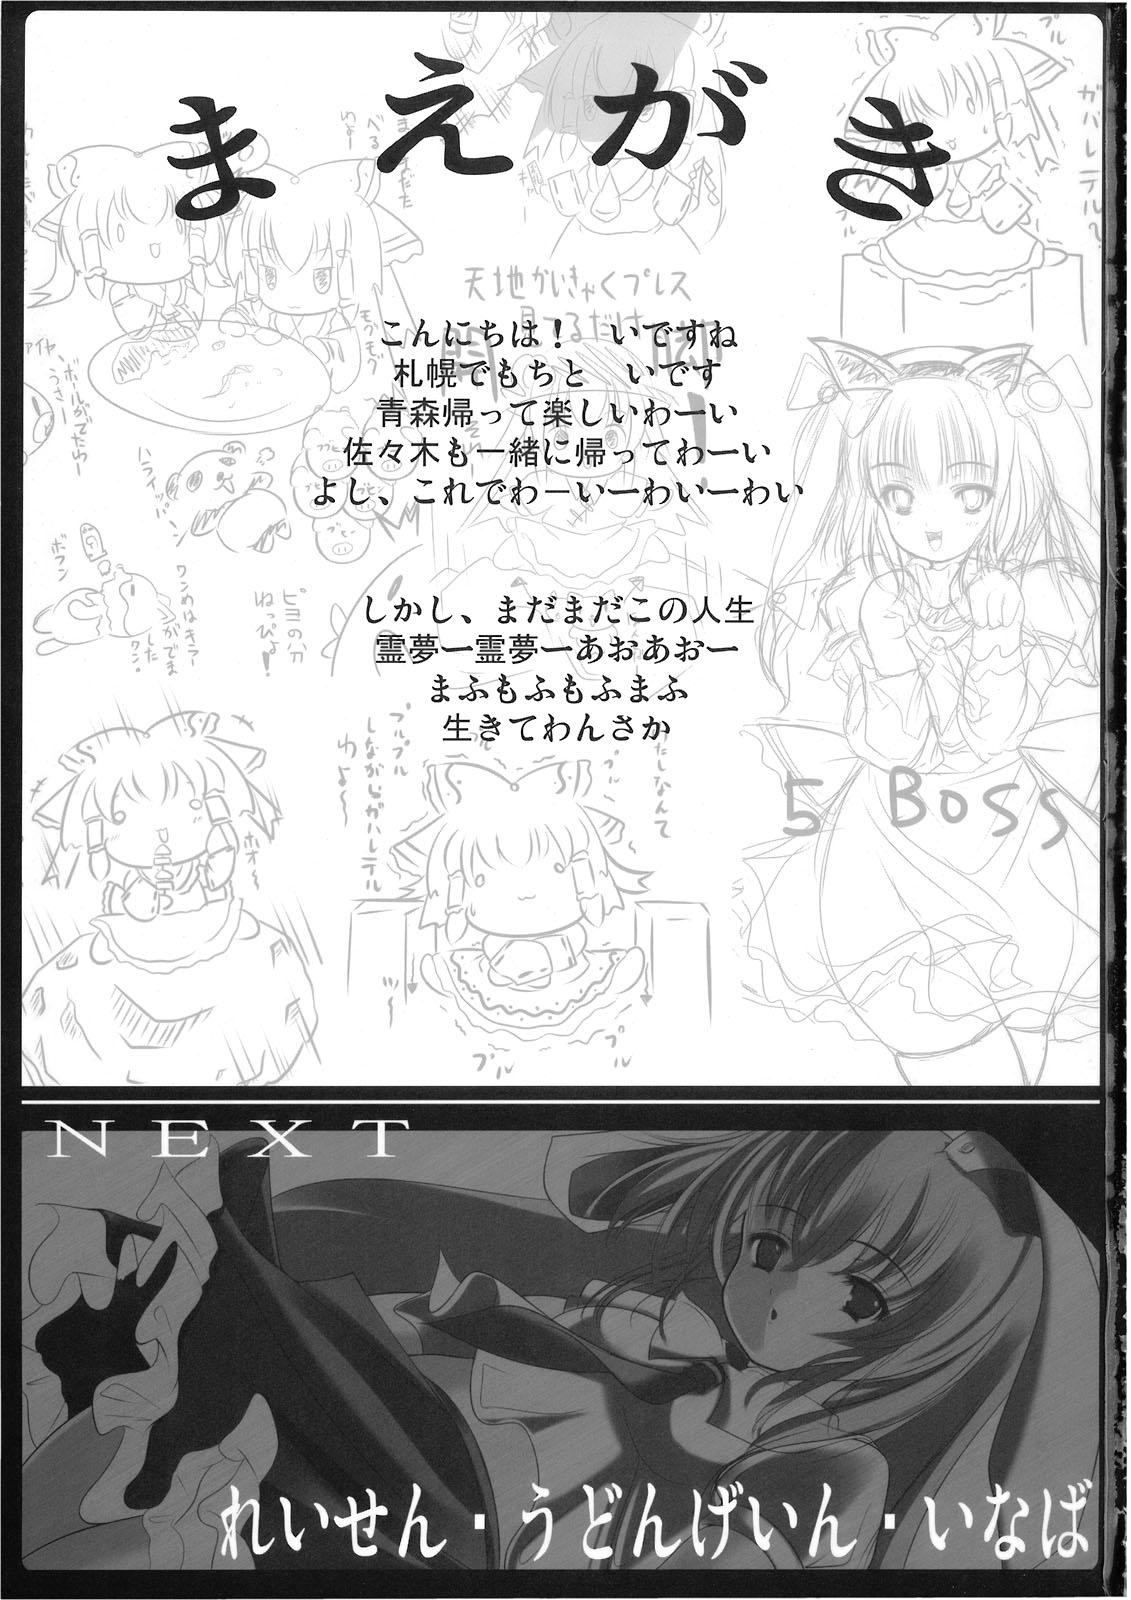 Threesome 幻想郷 爆!! - Touhou project Gay Uncut - Page 3